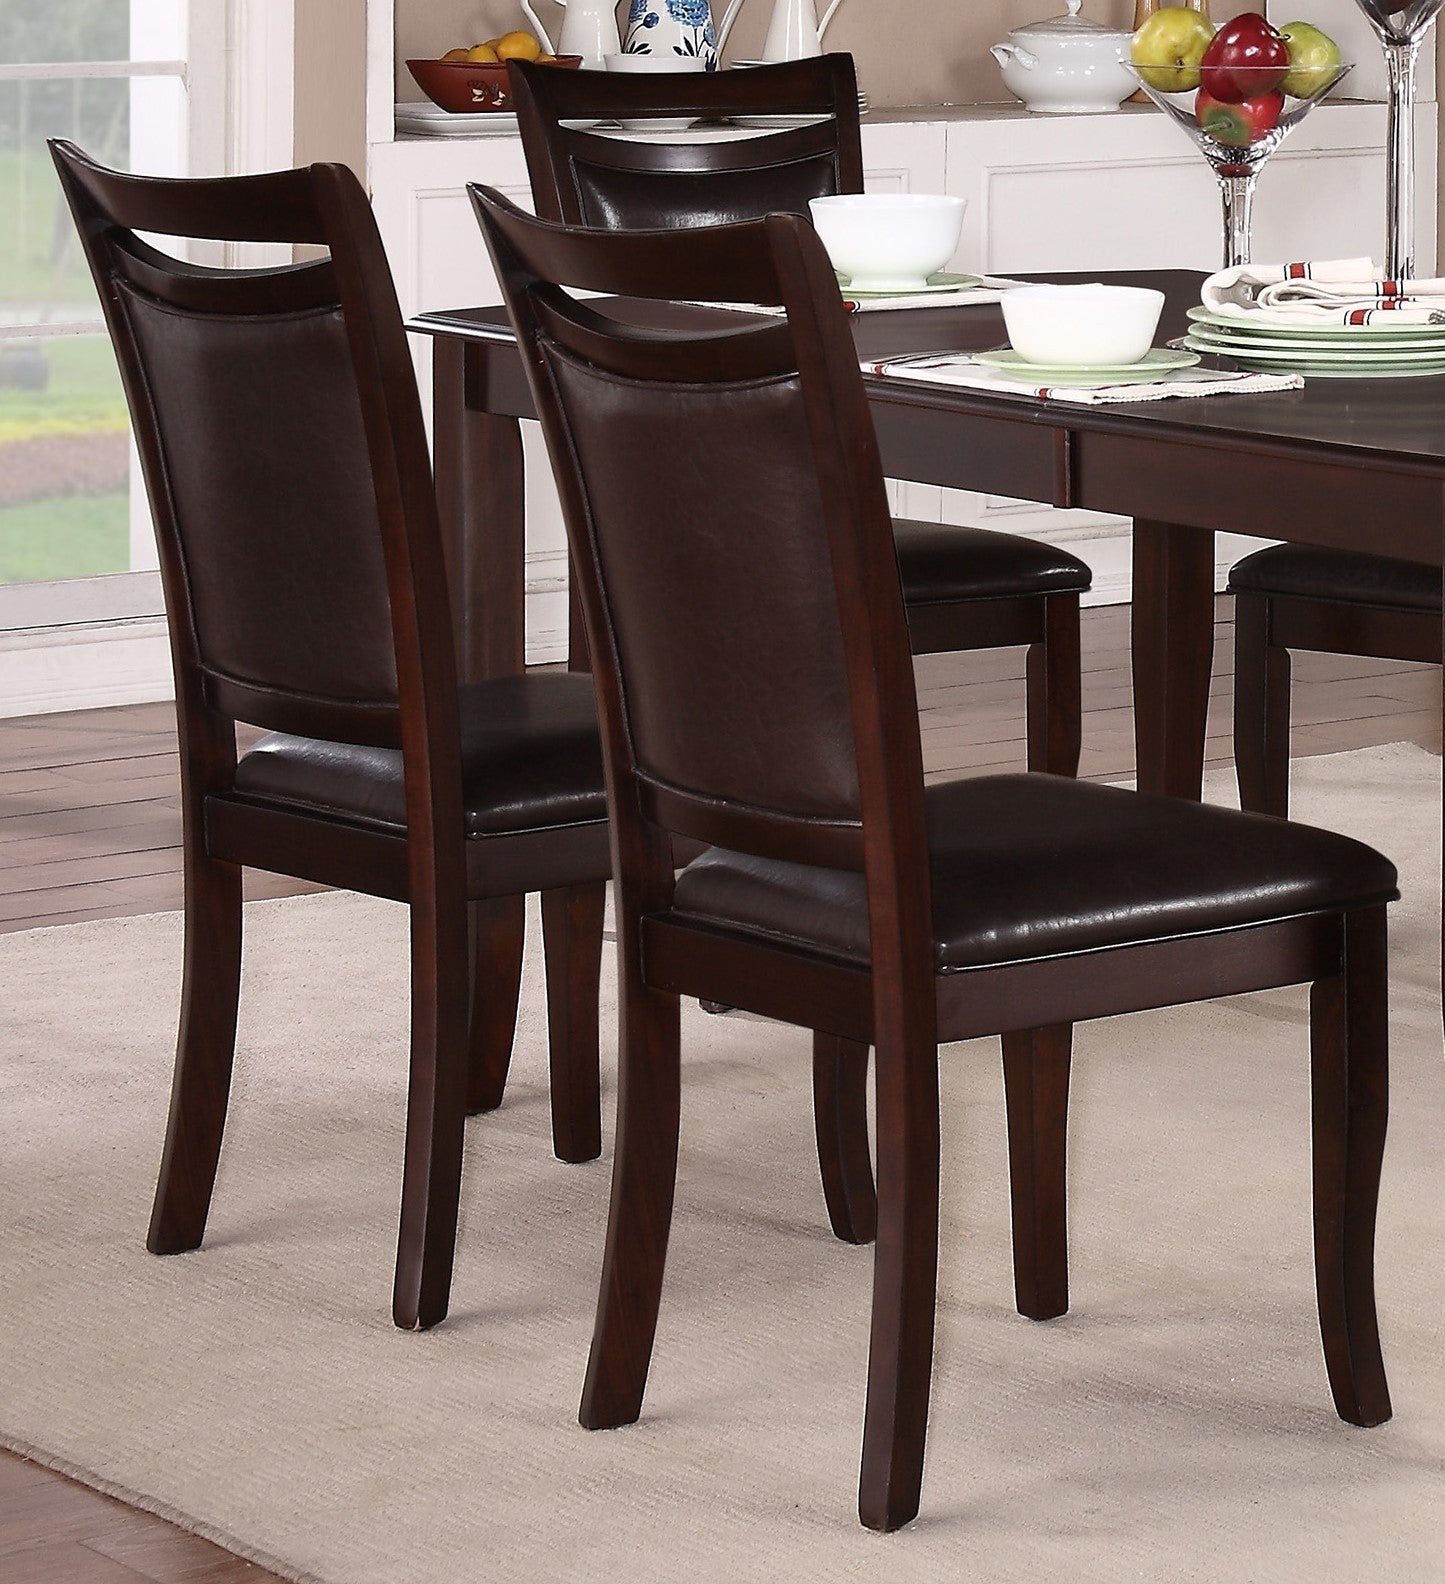 Dining Room Set of 7 Table with Extension Leaf 6x side Chairs (Brown)